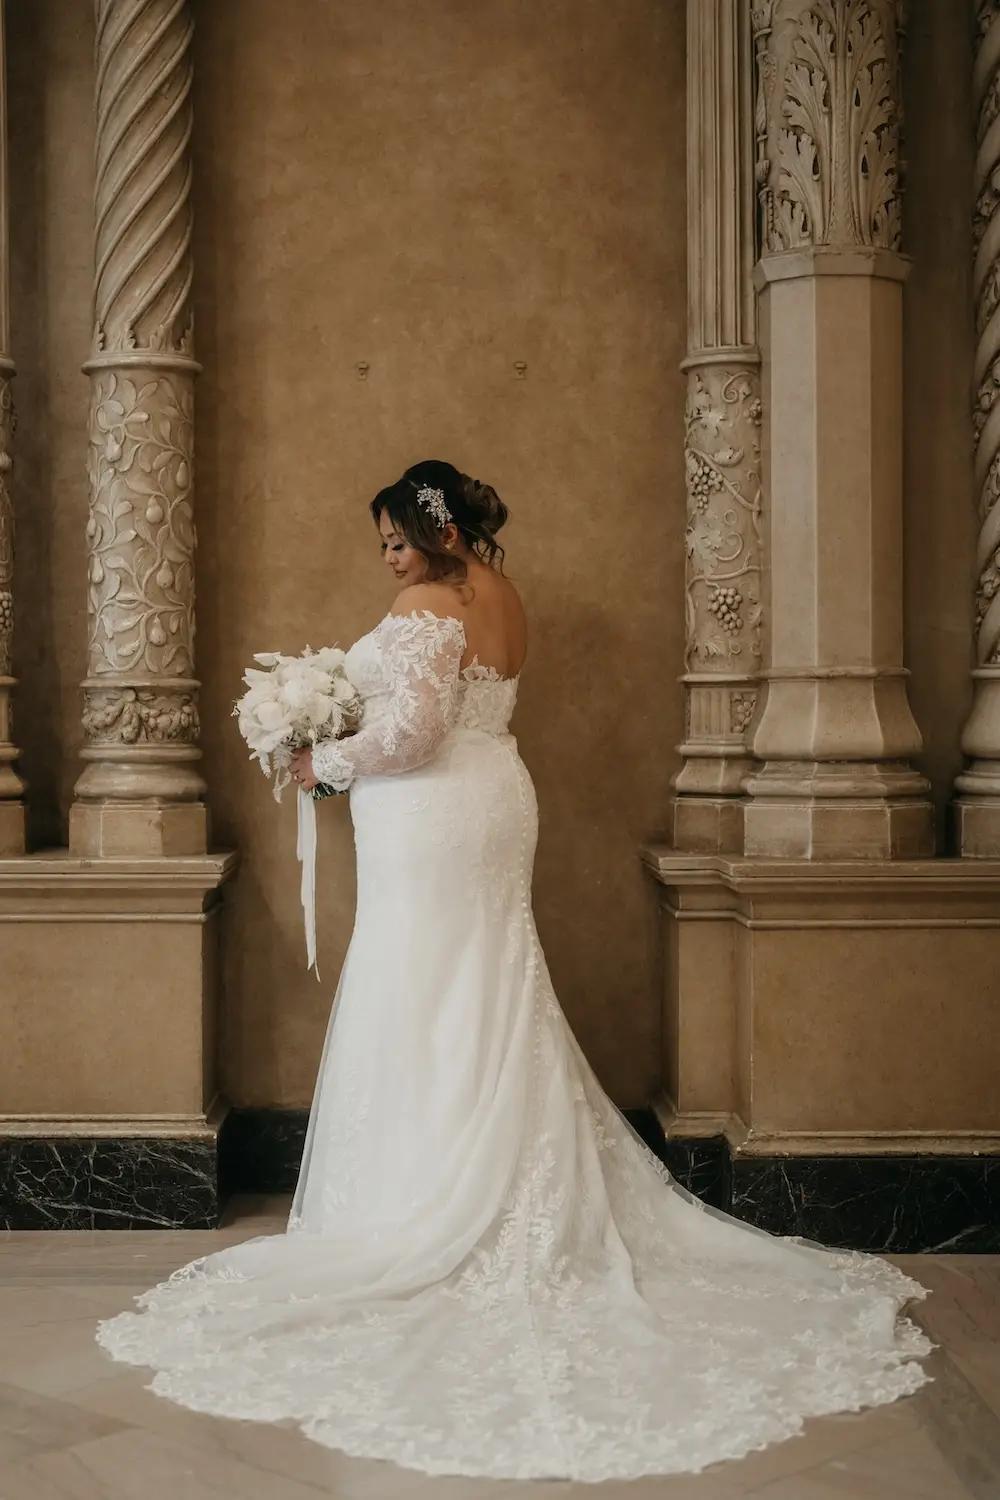 Aivanna Wears Off The Shoulders Lace Wedding Dress with Long Sleeves. Desktop Image